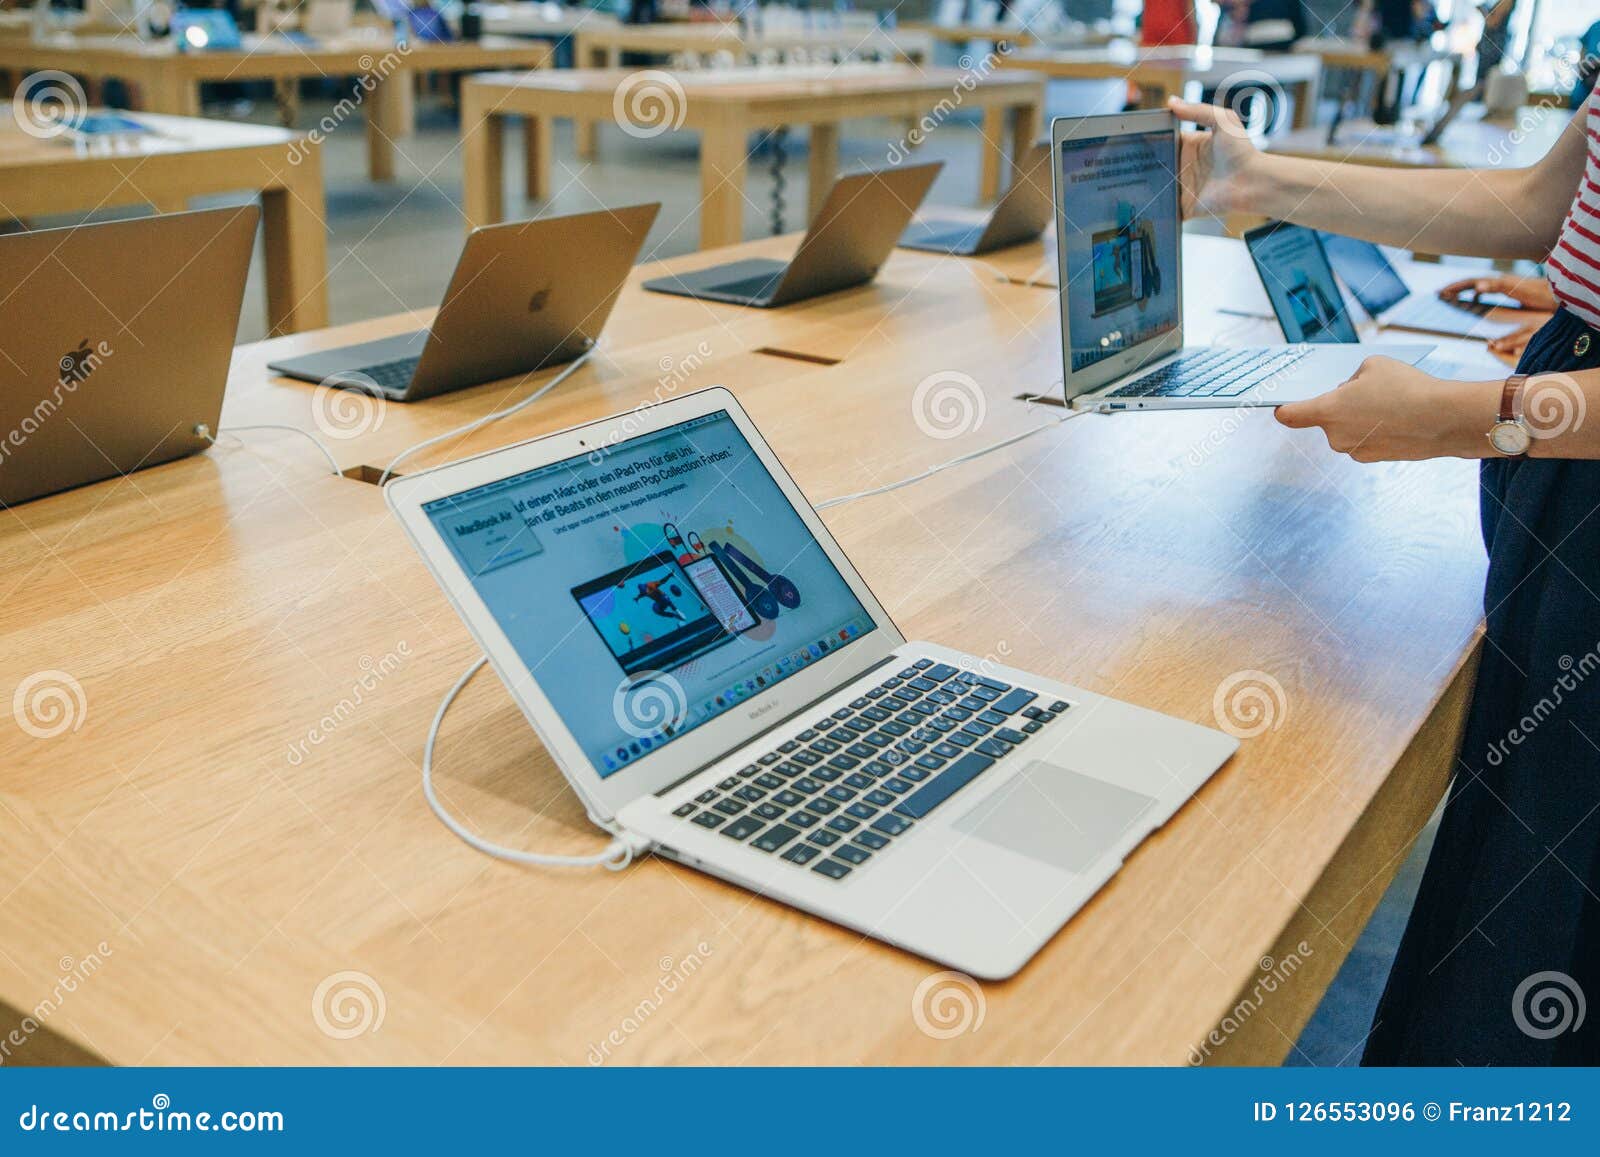 Retail Sale Of New Macbooks In The Official Store Of Apple In